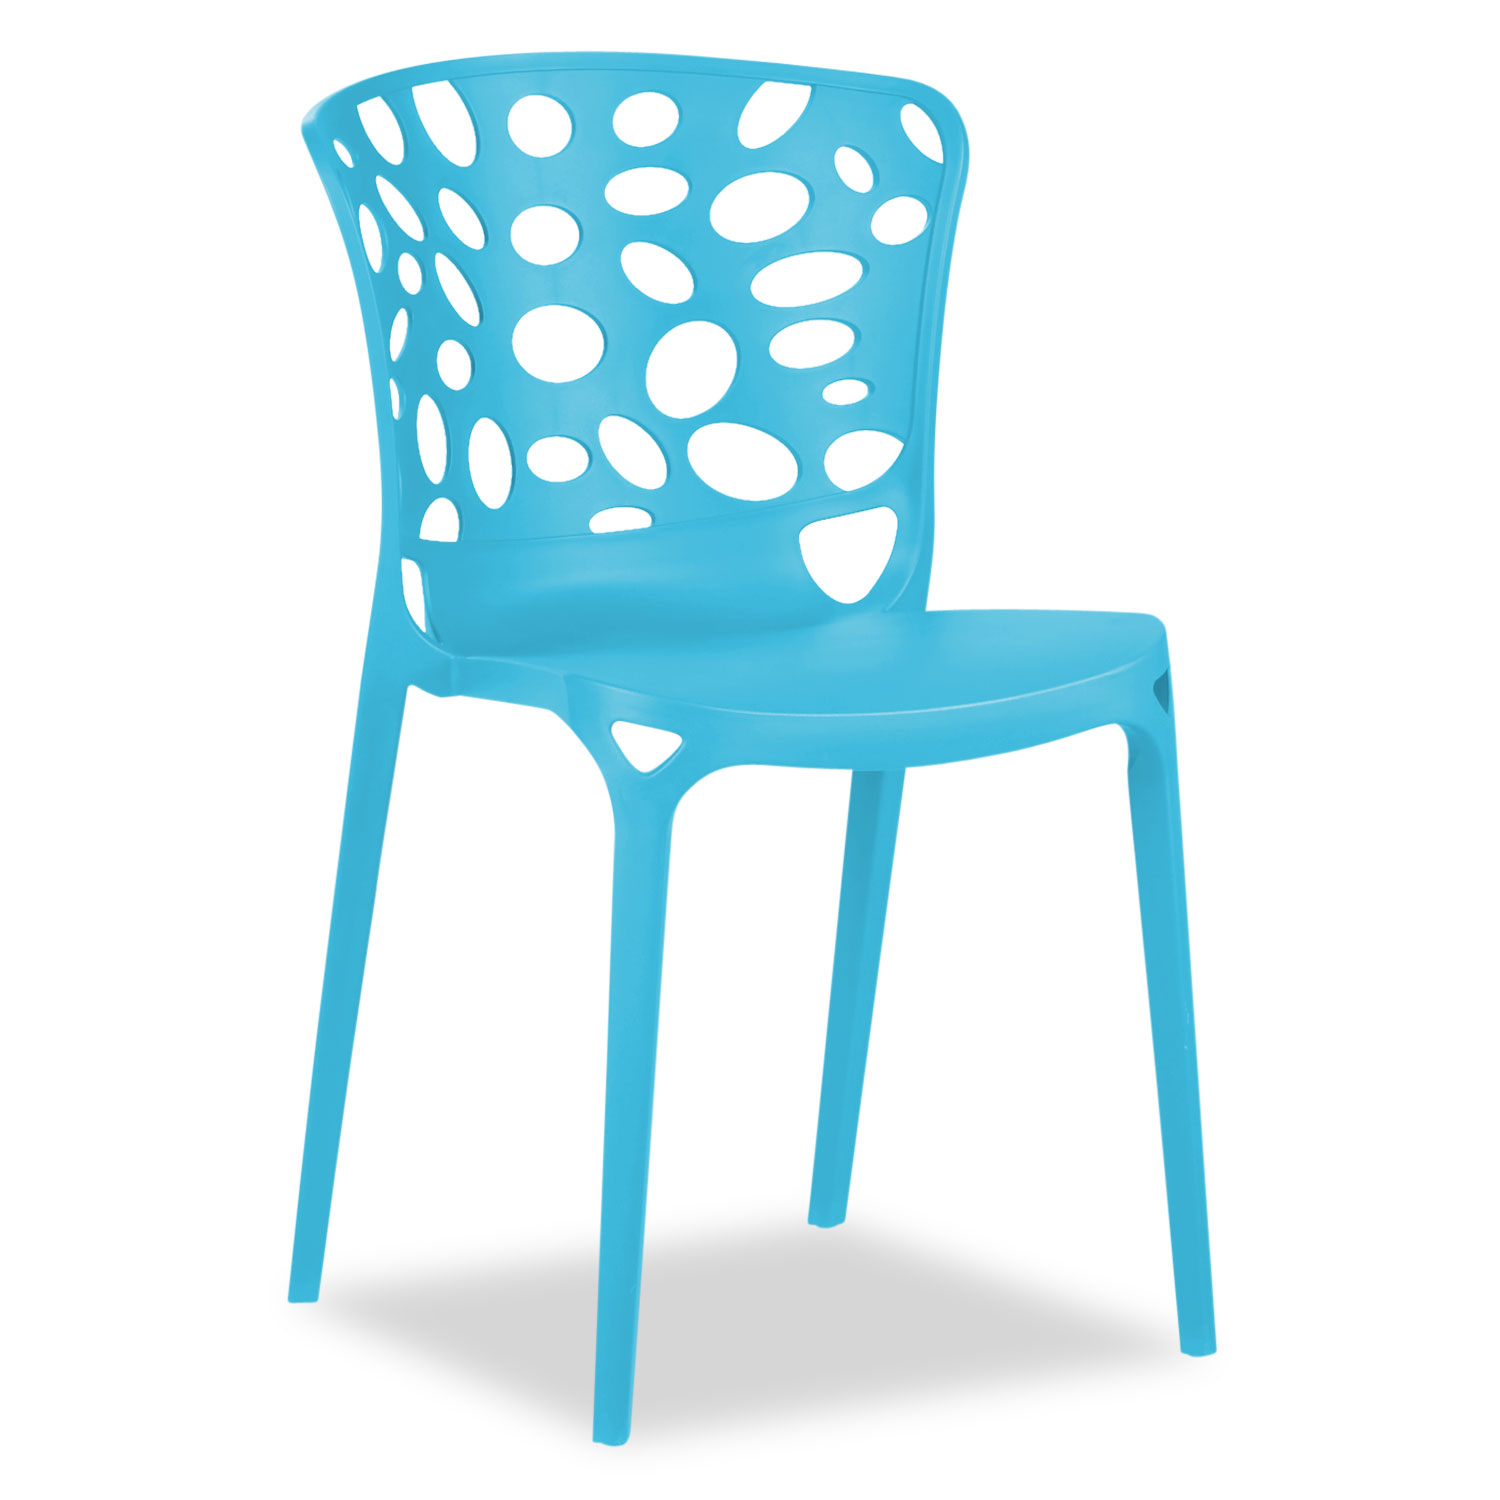 Garden chair Set of 6 Modern Blue Camping chairs Outdoor chairs Plastic Stacking chairs Kitchen chairs